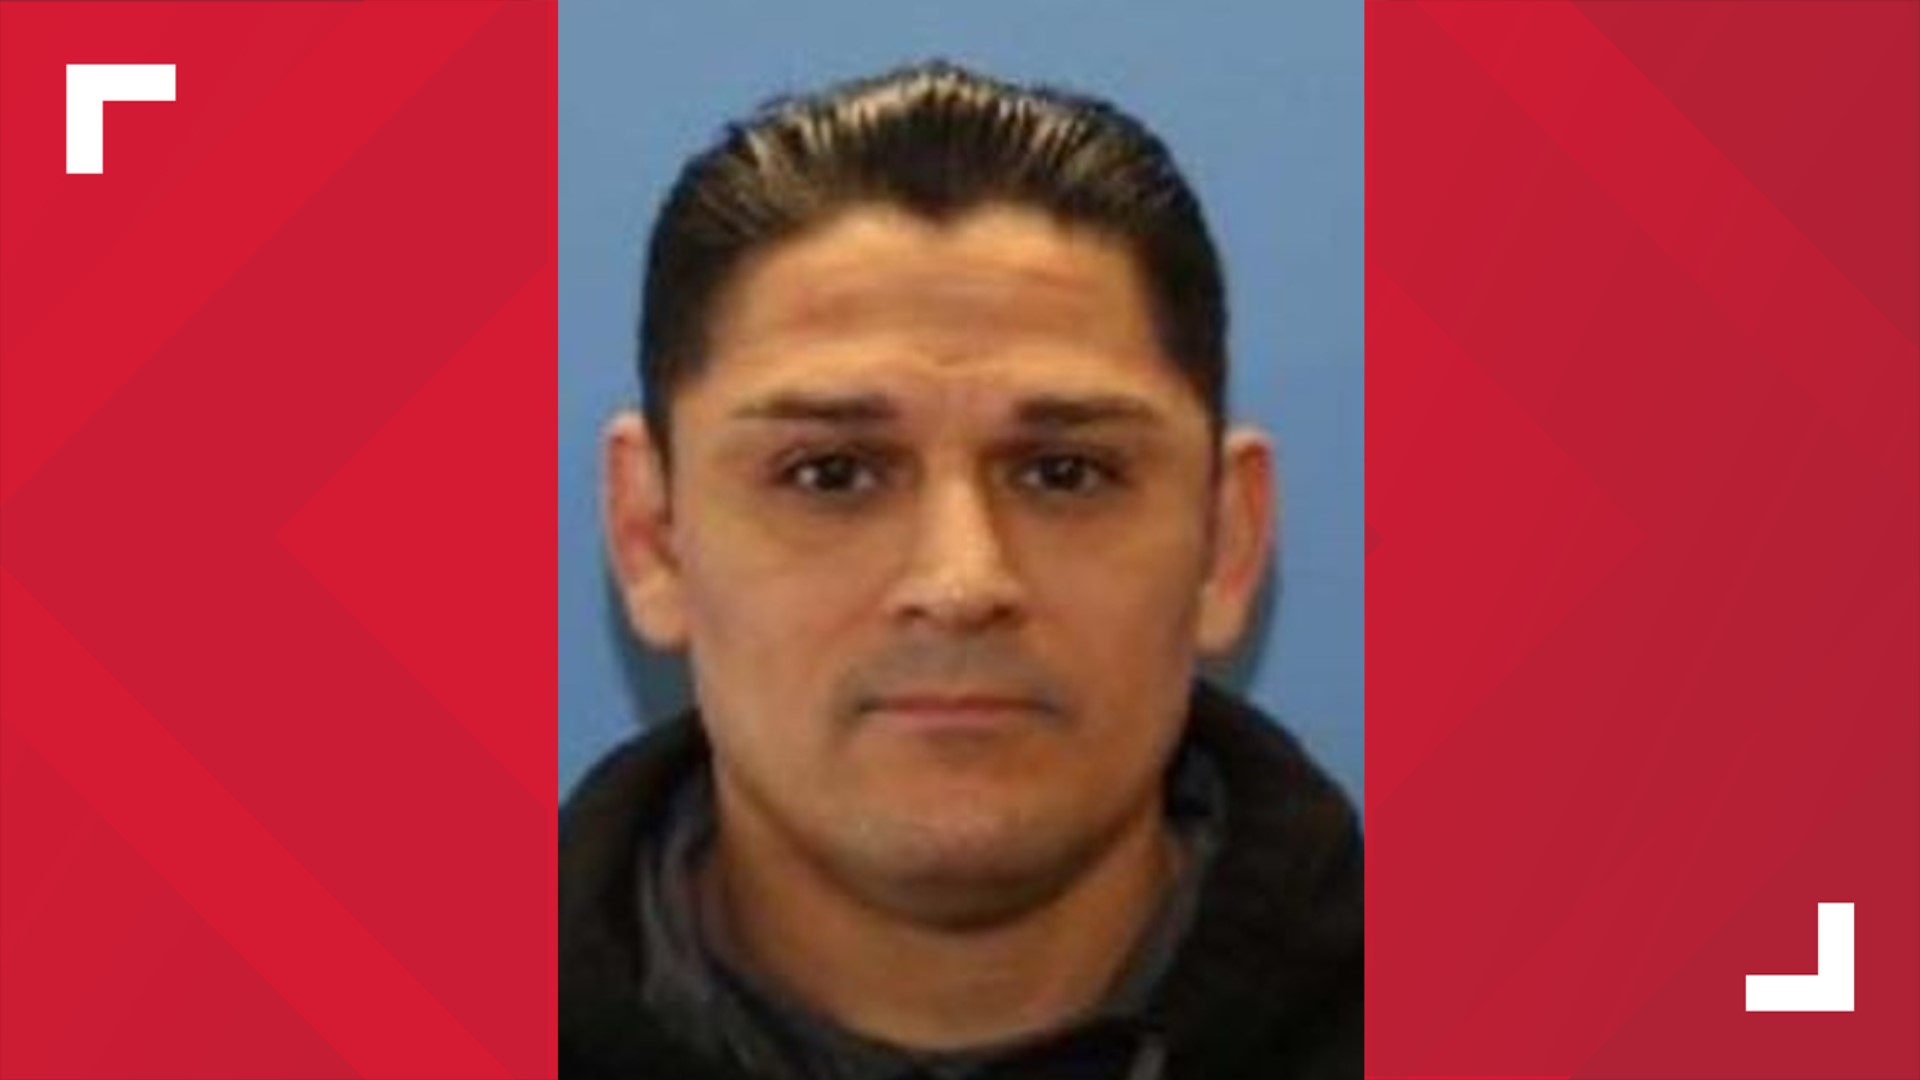 Police have identified the suspect as Elias Huizar. WSP said he is suspected of murdering his ex-wife and girlfriend and abducting his 1-year-old child.